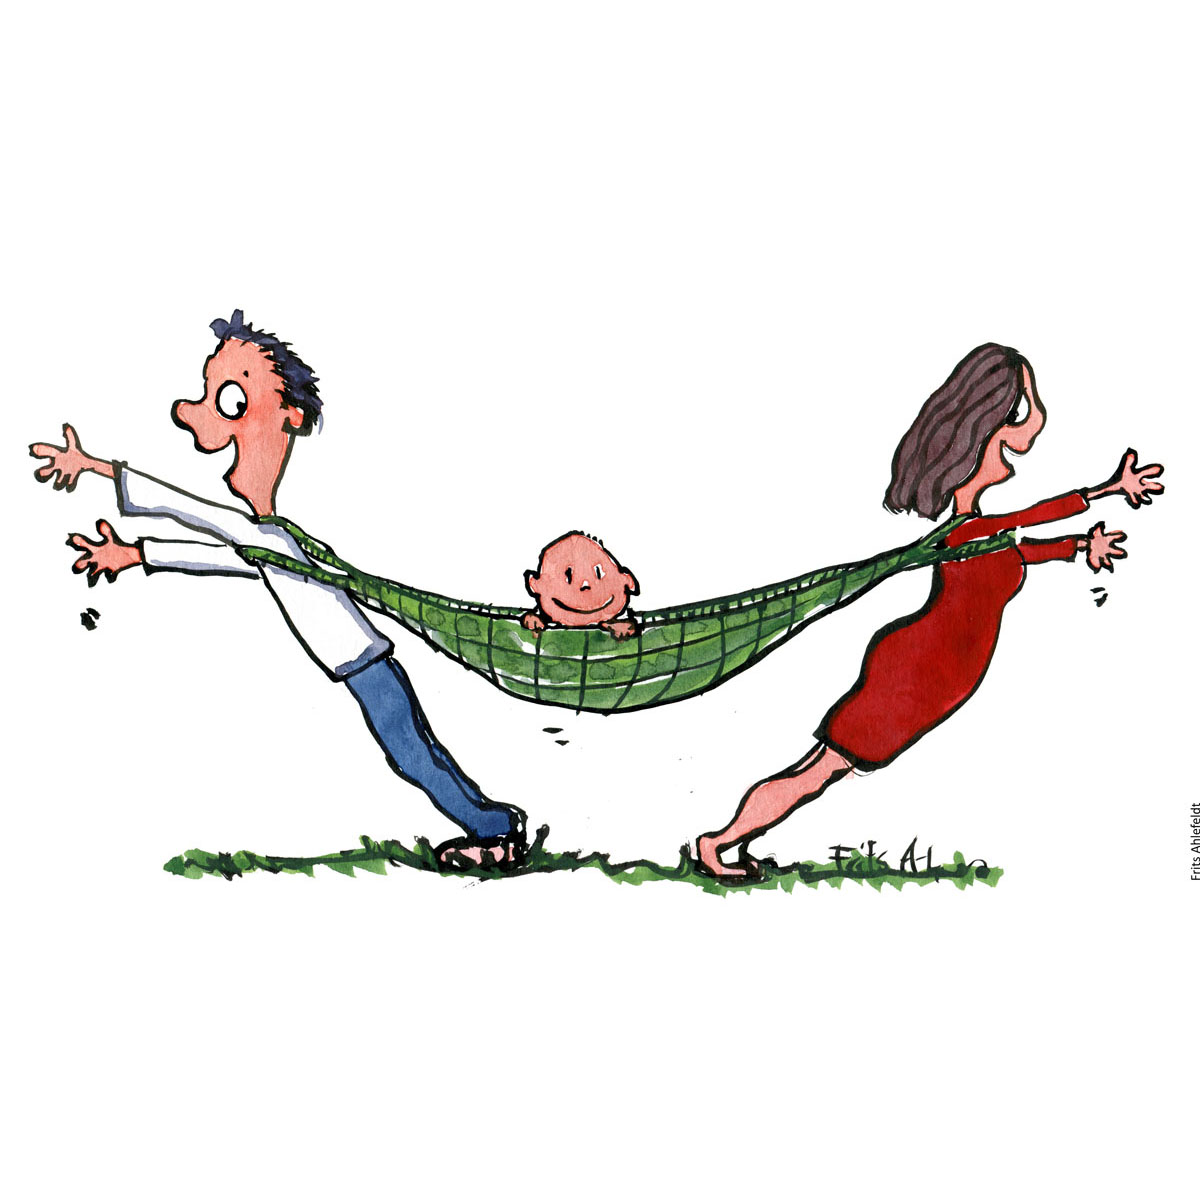 Drawing of a kid in a hammock, with a man and woman at each end. Illustration by Frits Ahlefeldt